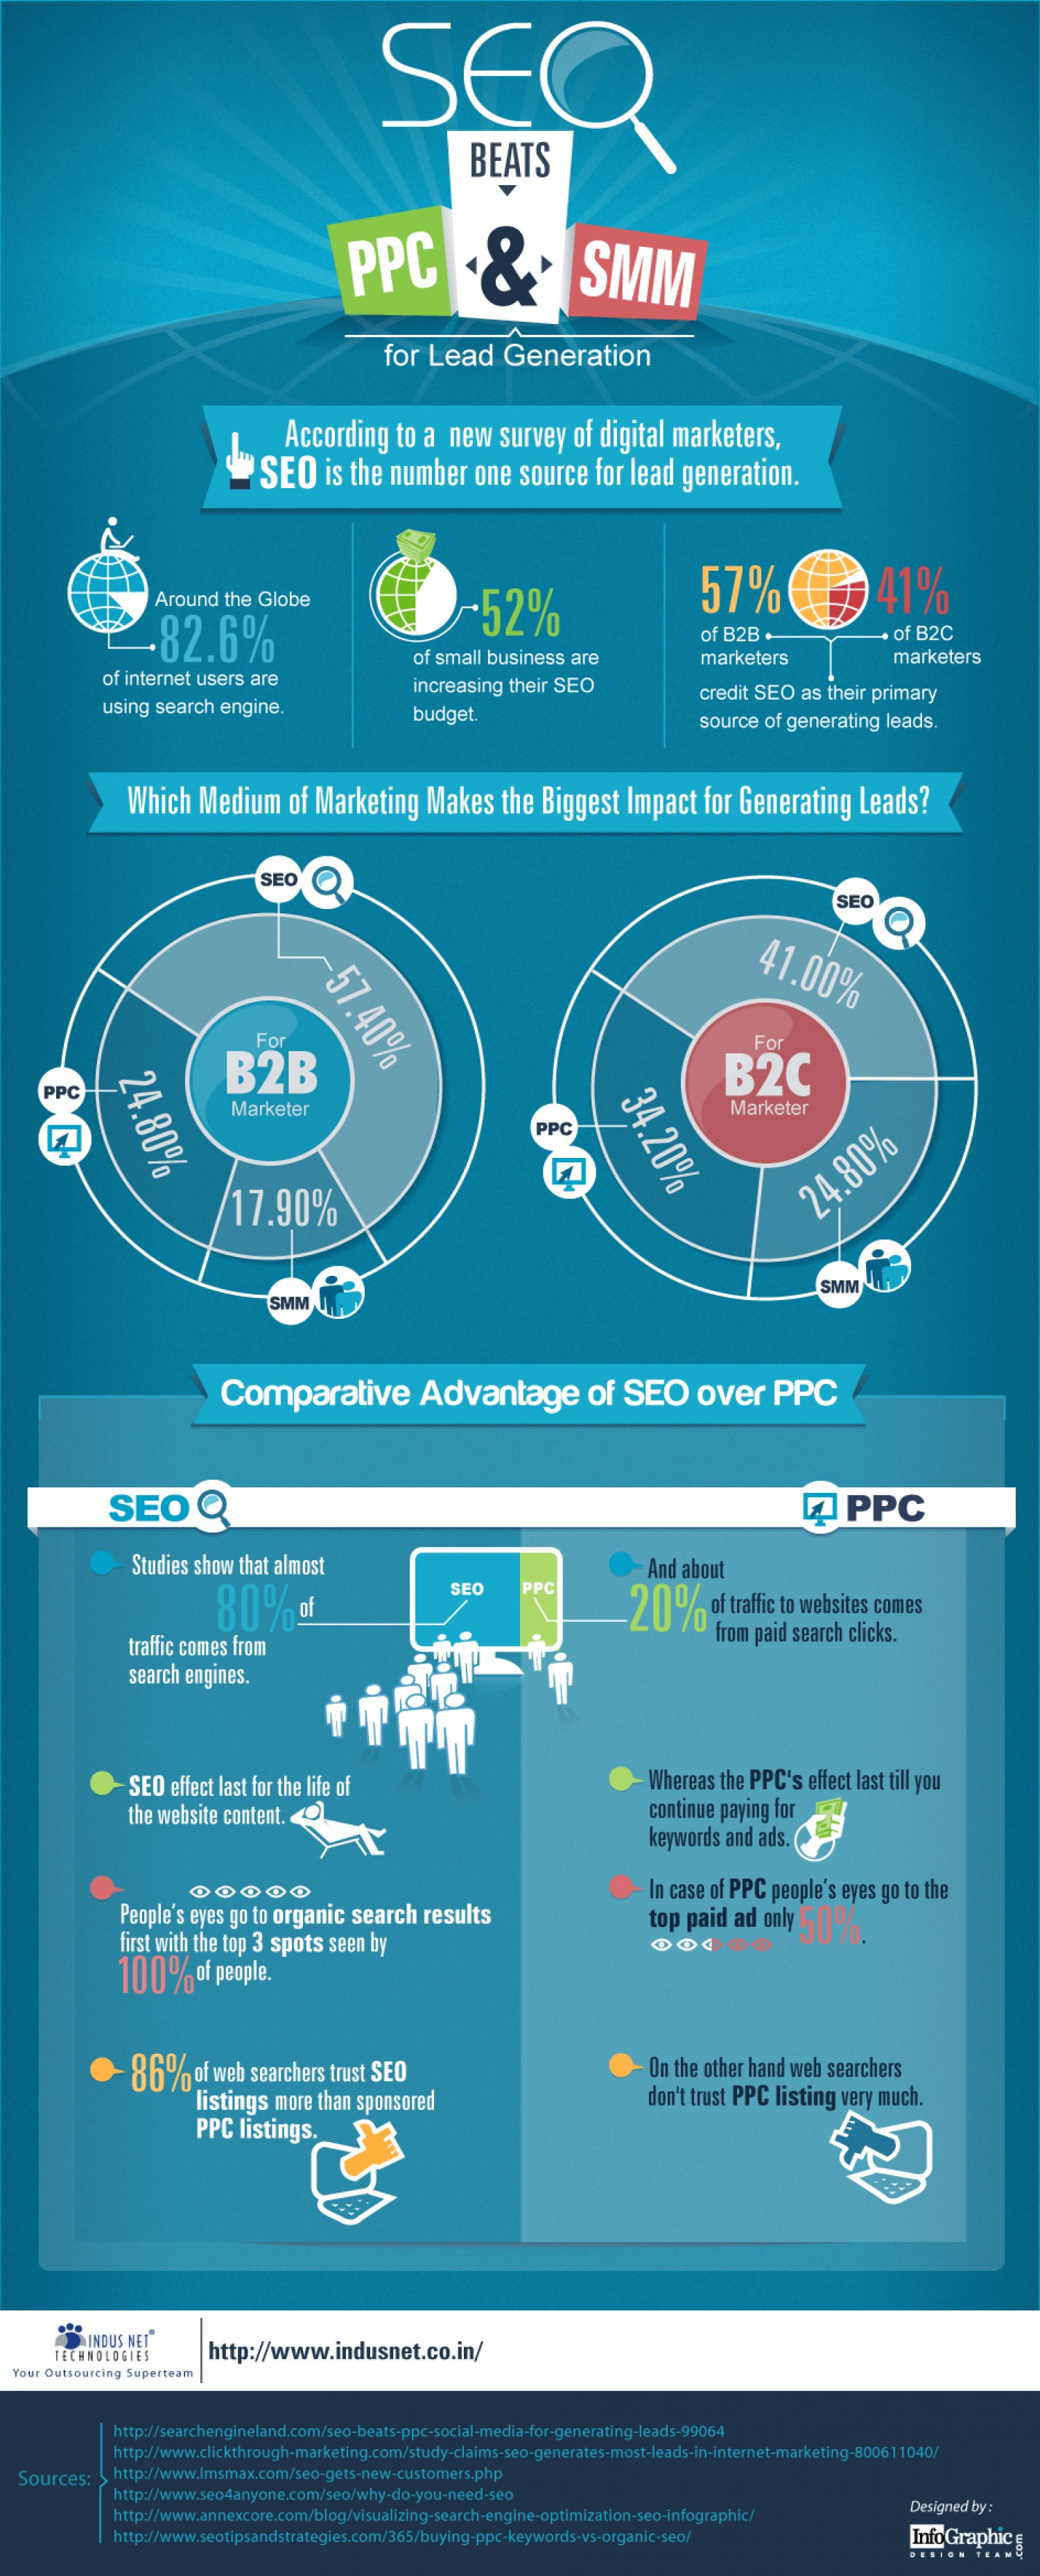 SEO beats PPC and SMM for Lead Generation